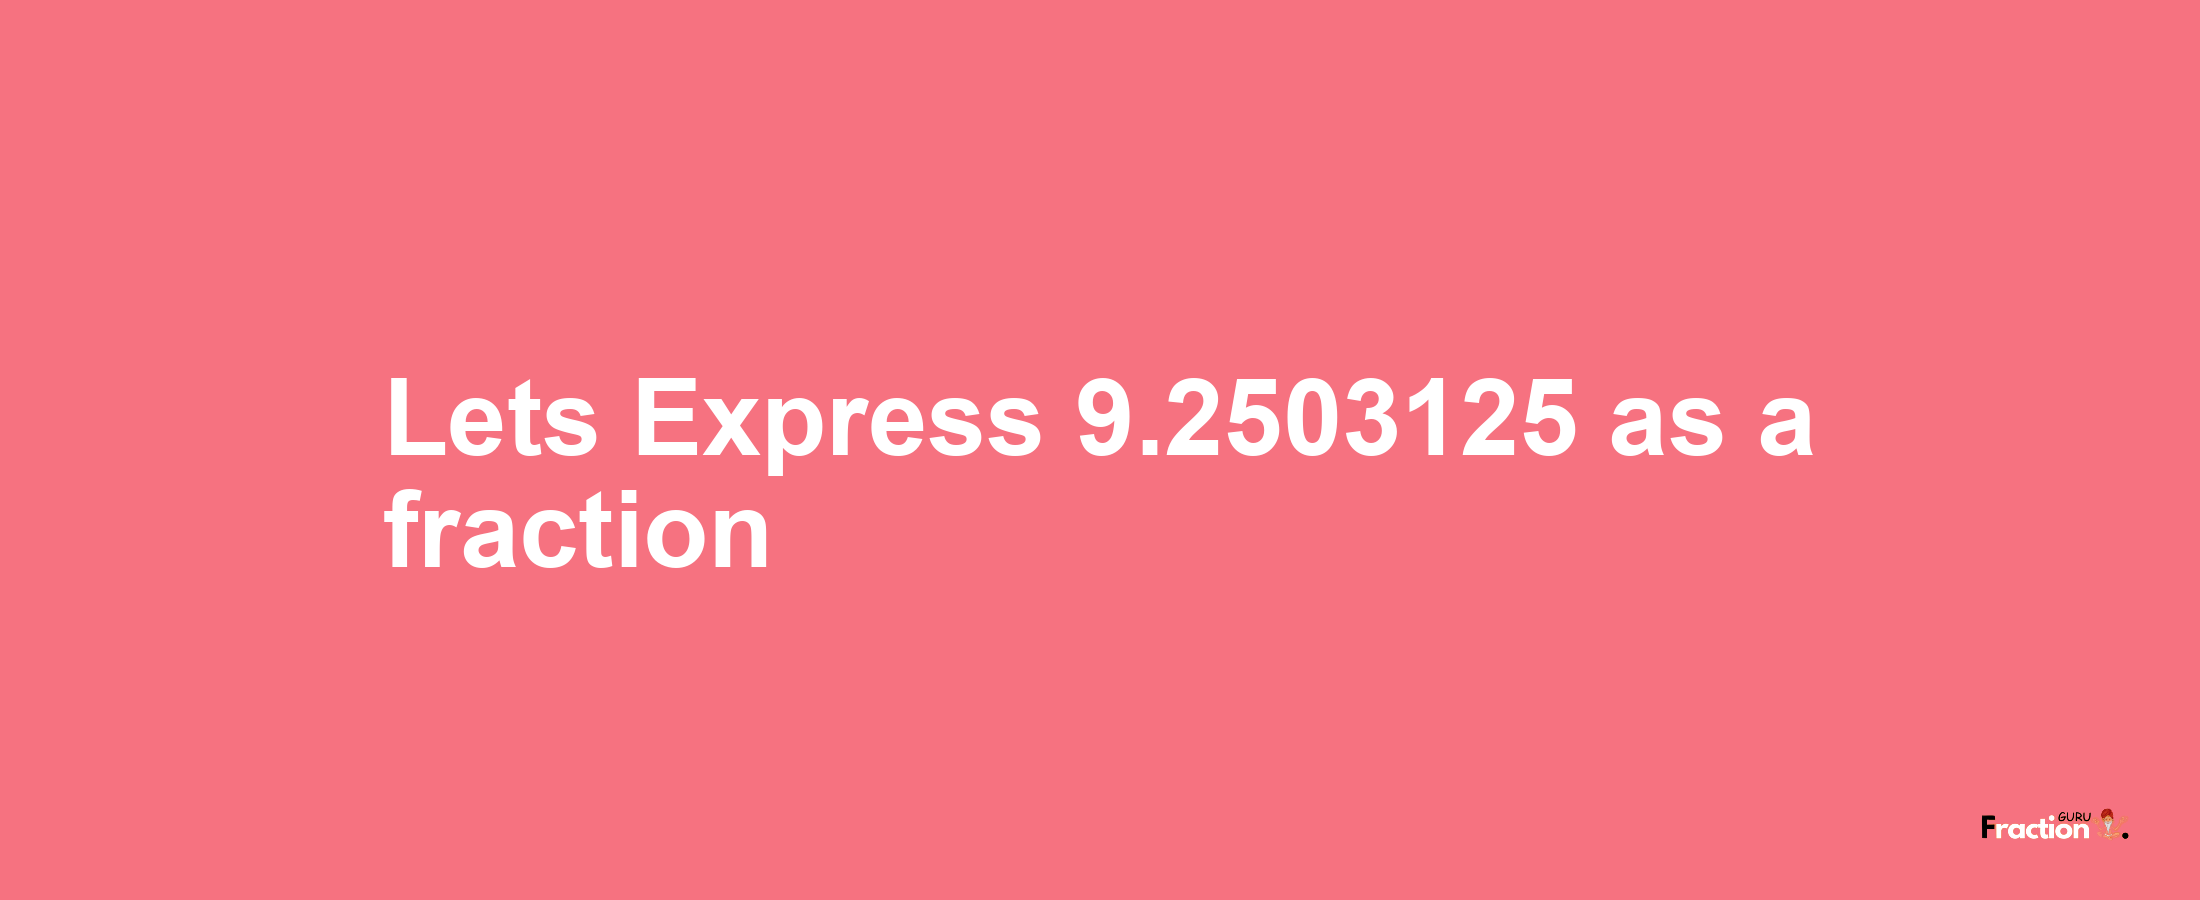 Lets Express 9.2503125 as afraction